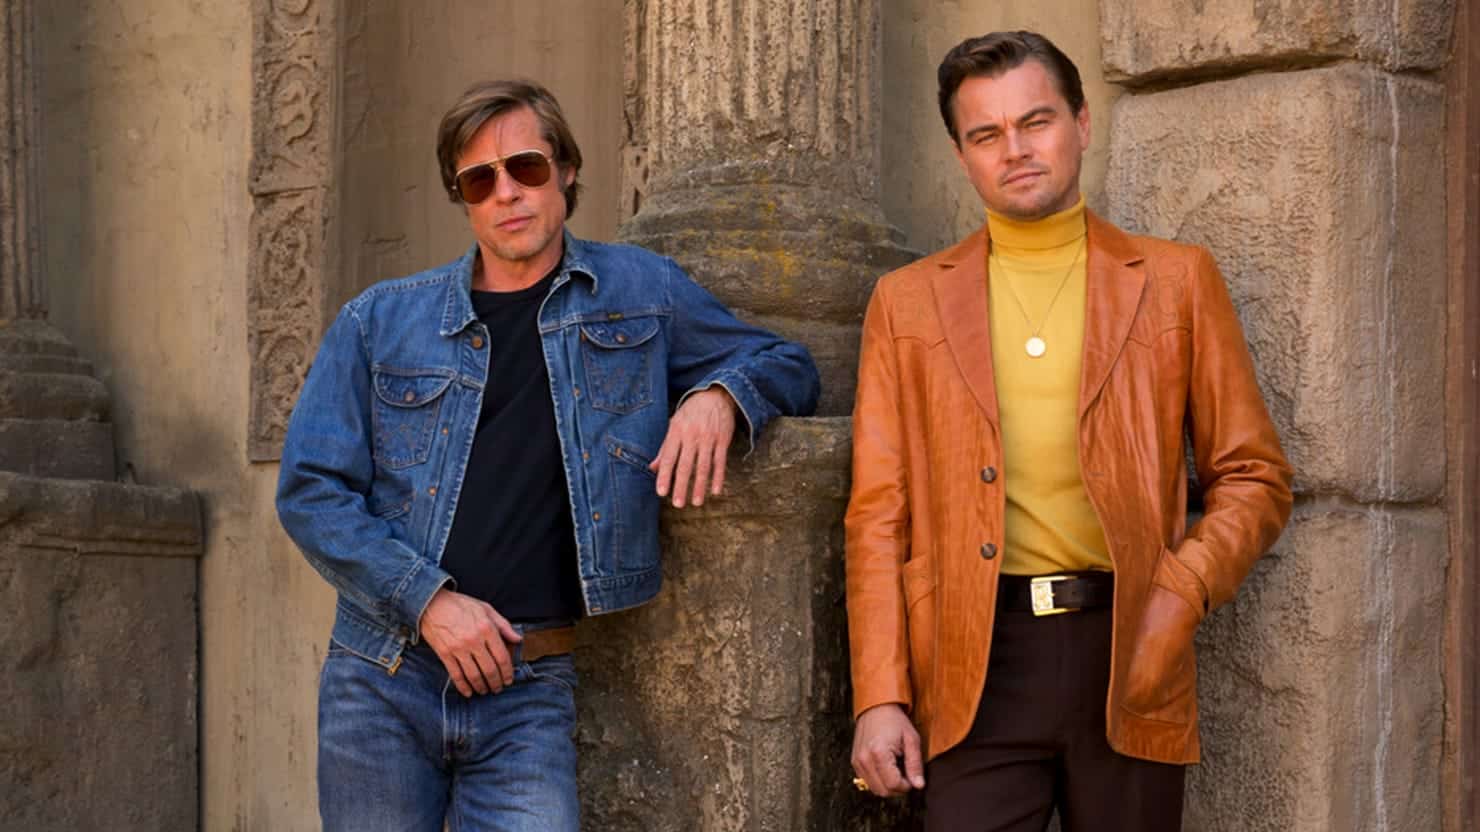 190520-Porton-Once-Upon-a-Time-in-Hollywood-tease_fla7w4